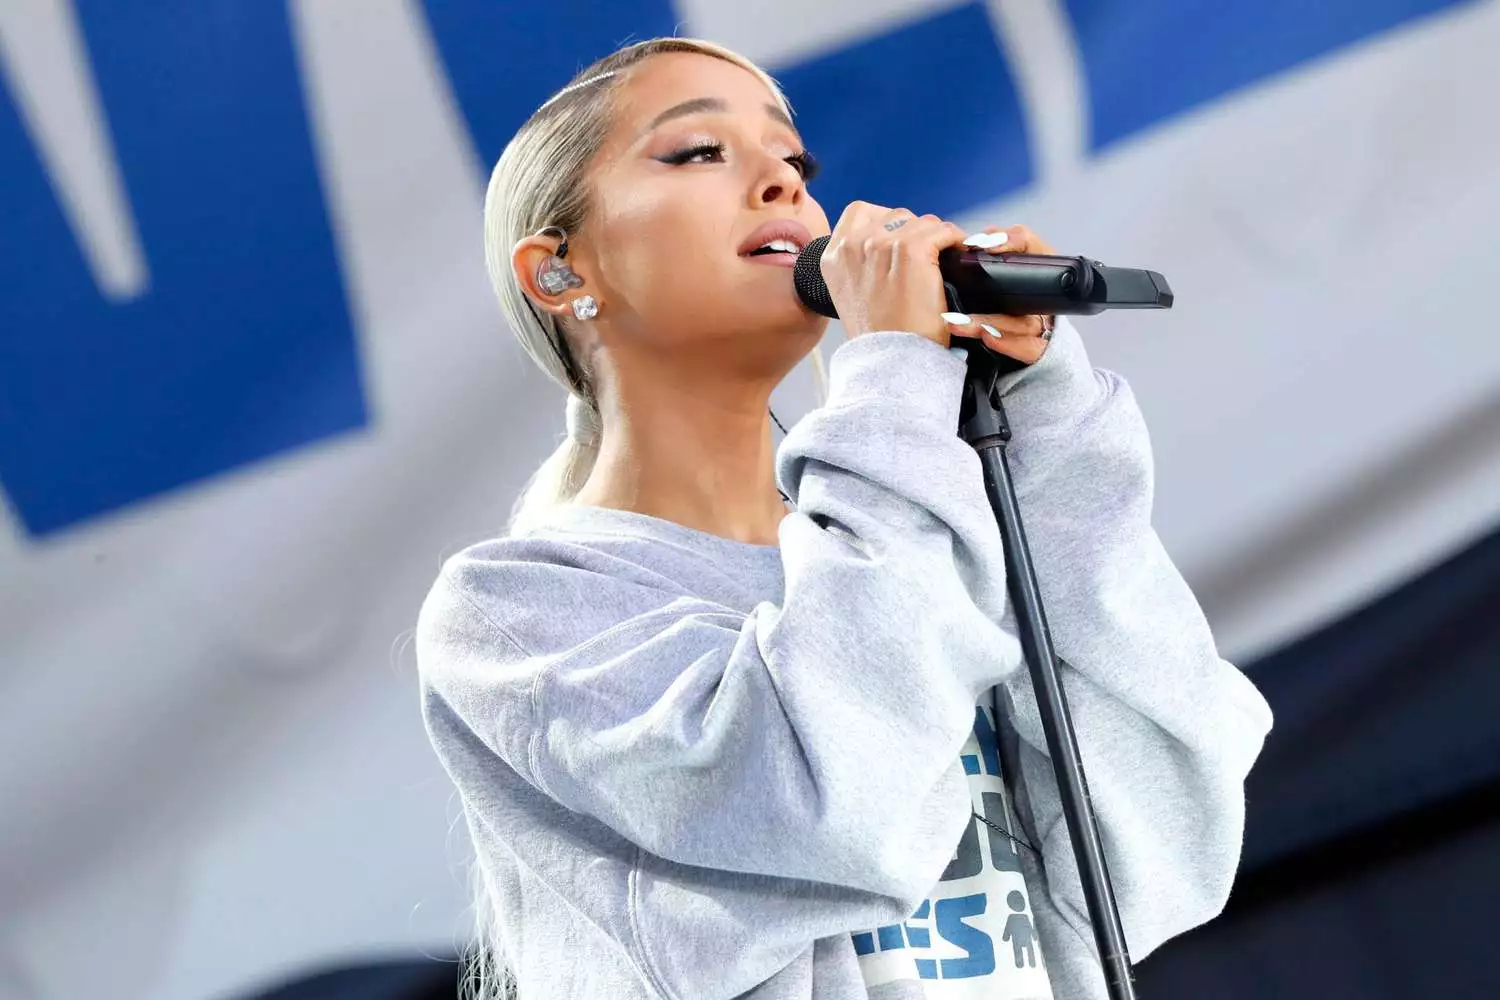 ariana-grande-teases-new-music-with-new-footage-from-the-recording-studio